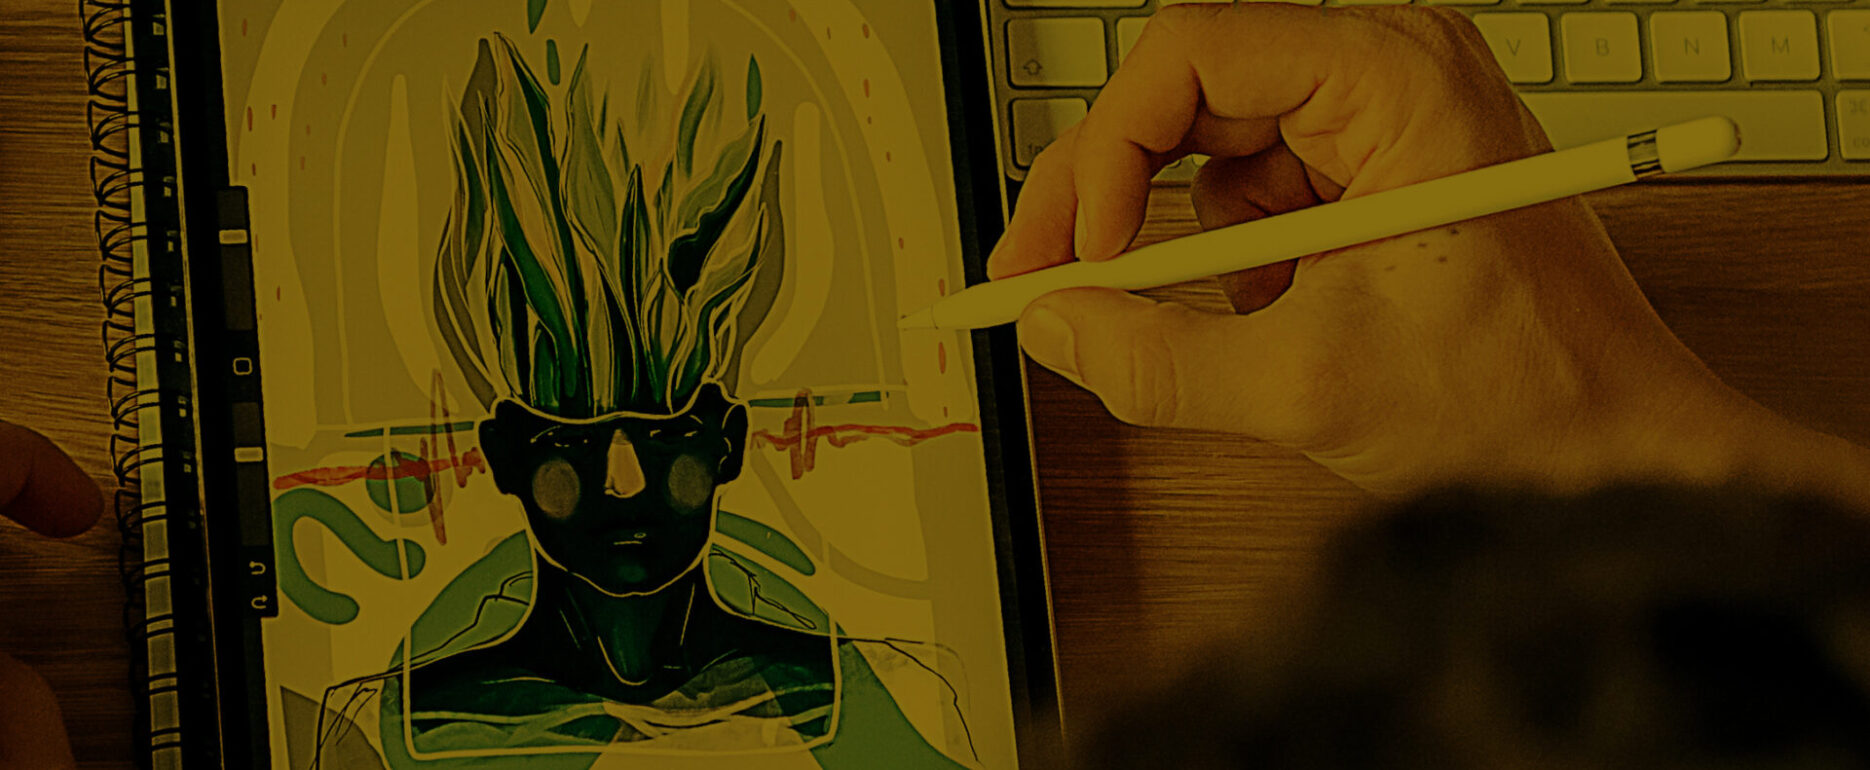 A person uses a stylus on a tablet to create digital art featuring a figure with flame-like hair and sunglasses. The tablet is placed on a wooden desk beside a sketchbook, keyboard, and an open laptop.